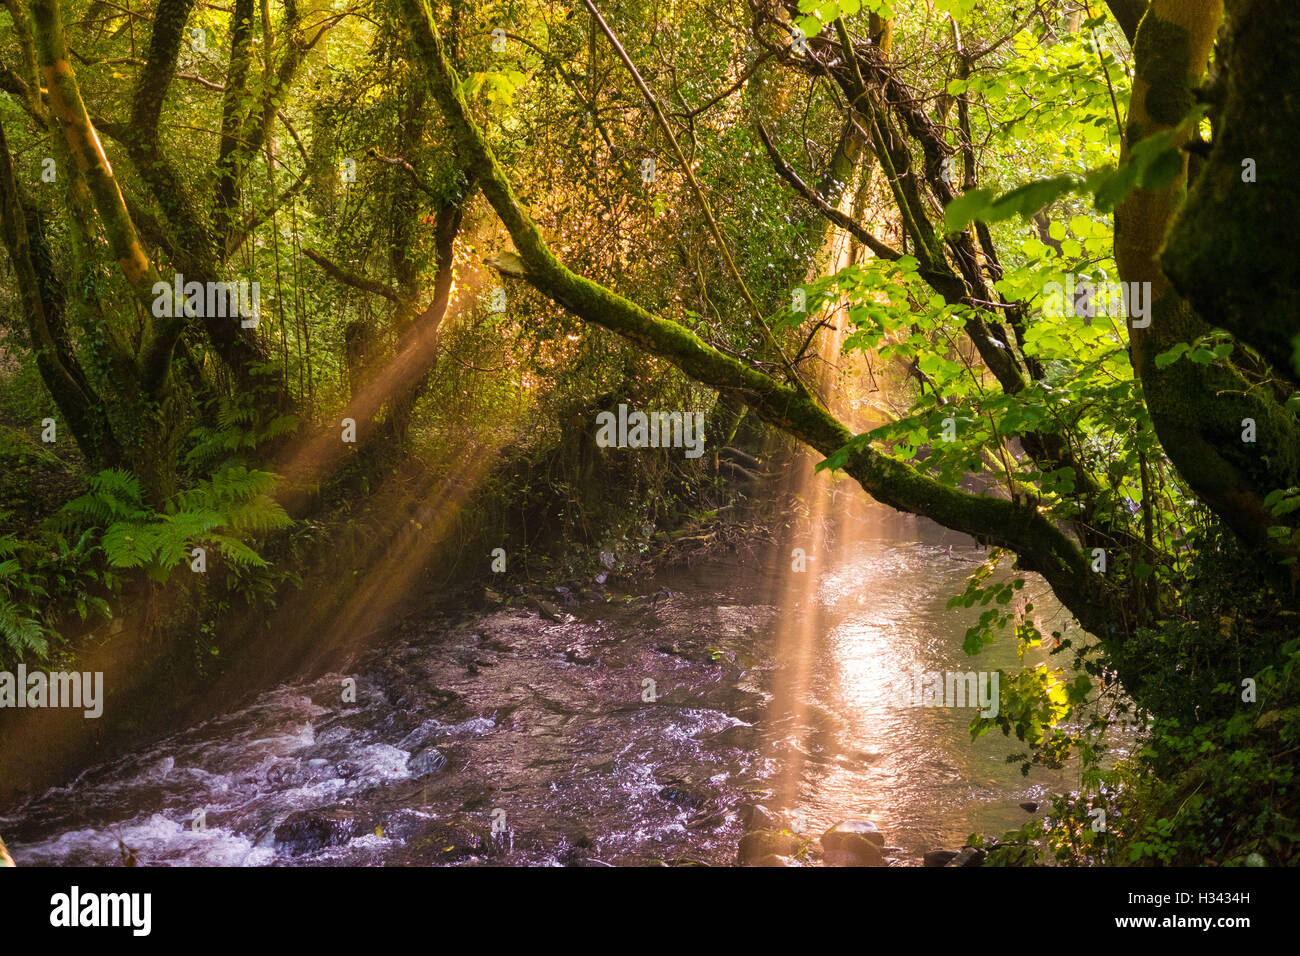 A view of the River Dare in the Dare Valley Country Park, Aberdare at dusk lit by rays of sunlight. Stock Photo